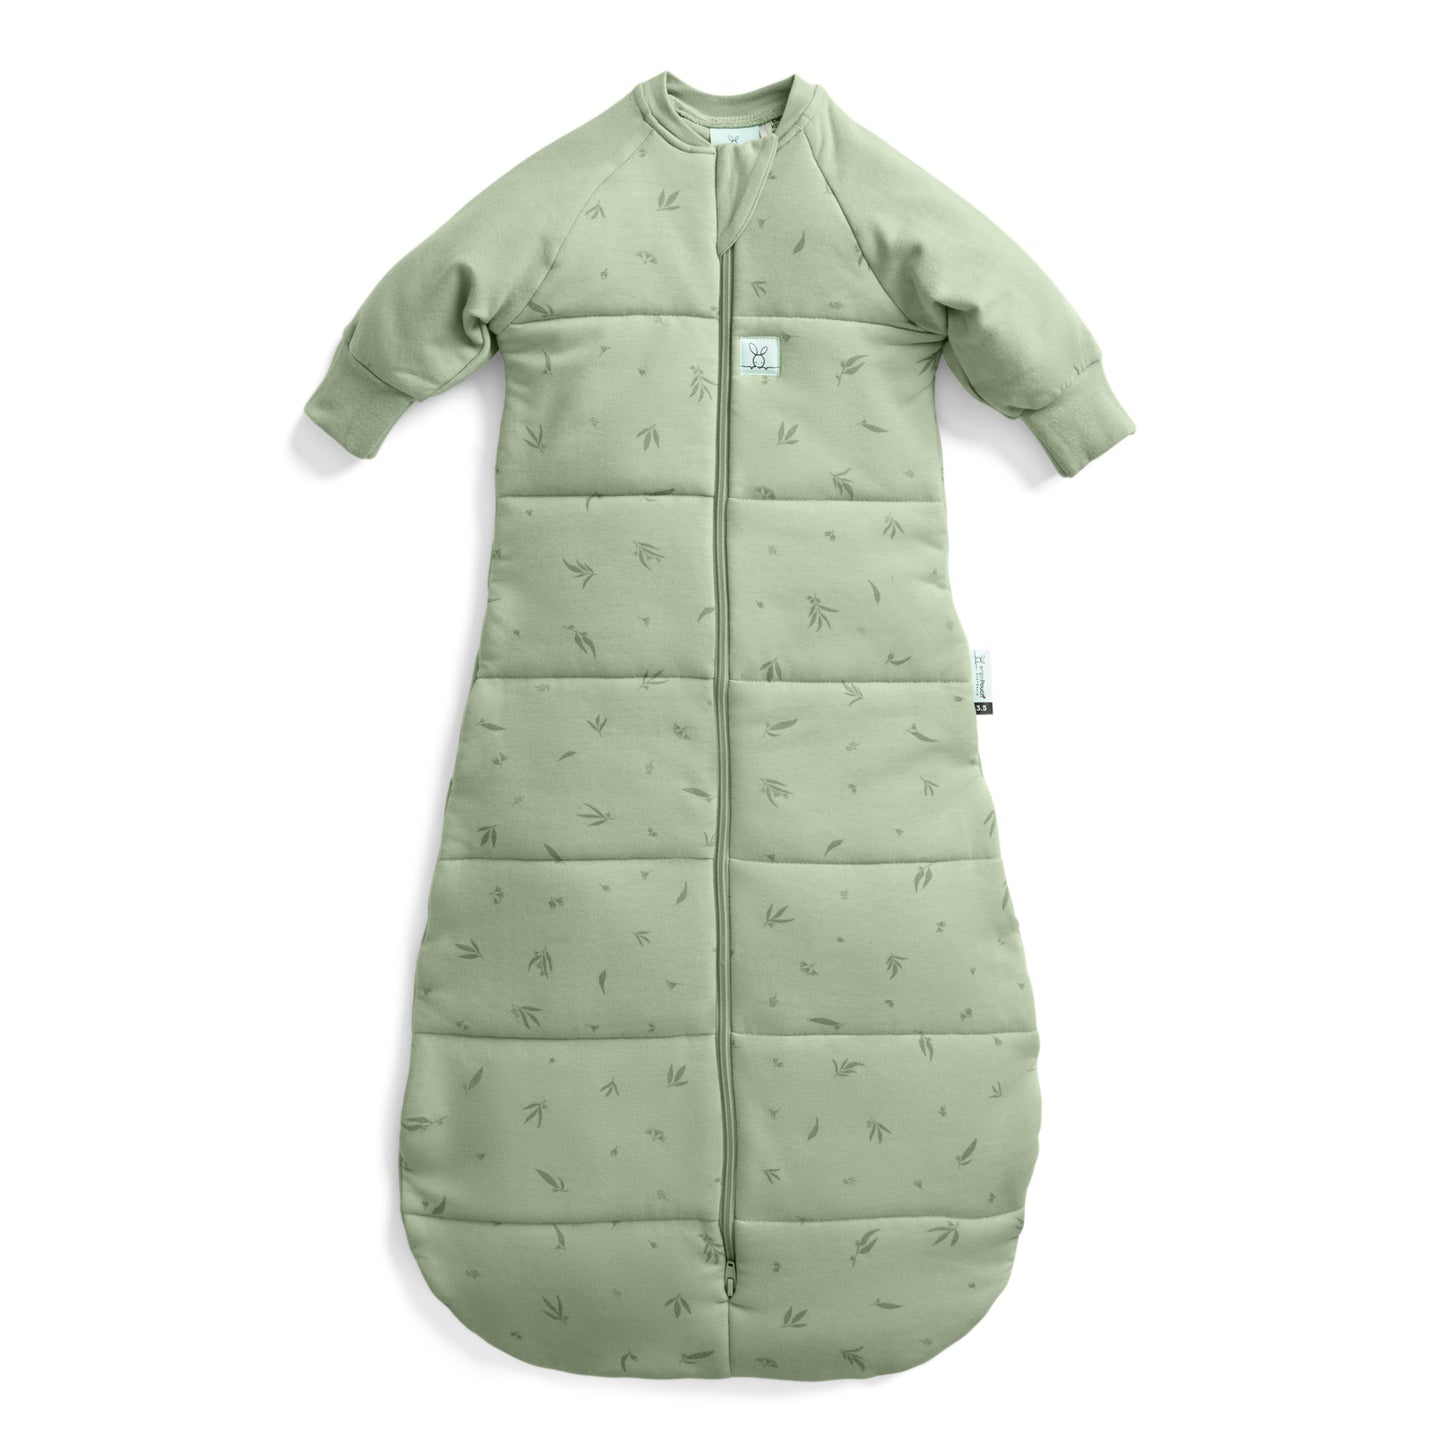 Jersey Sleeping Bag Sleeved 3.5 Tog, Willow- 8-24 months